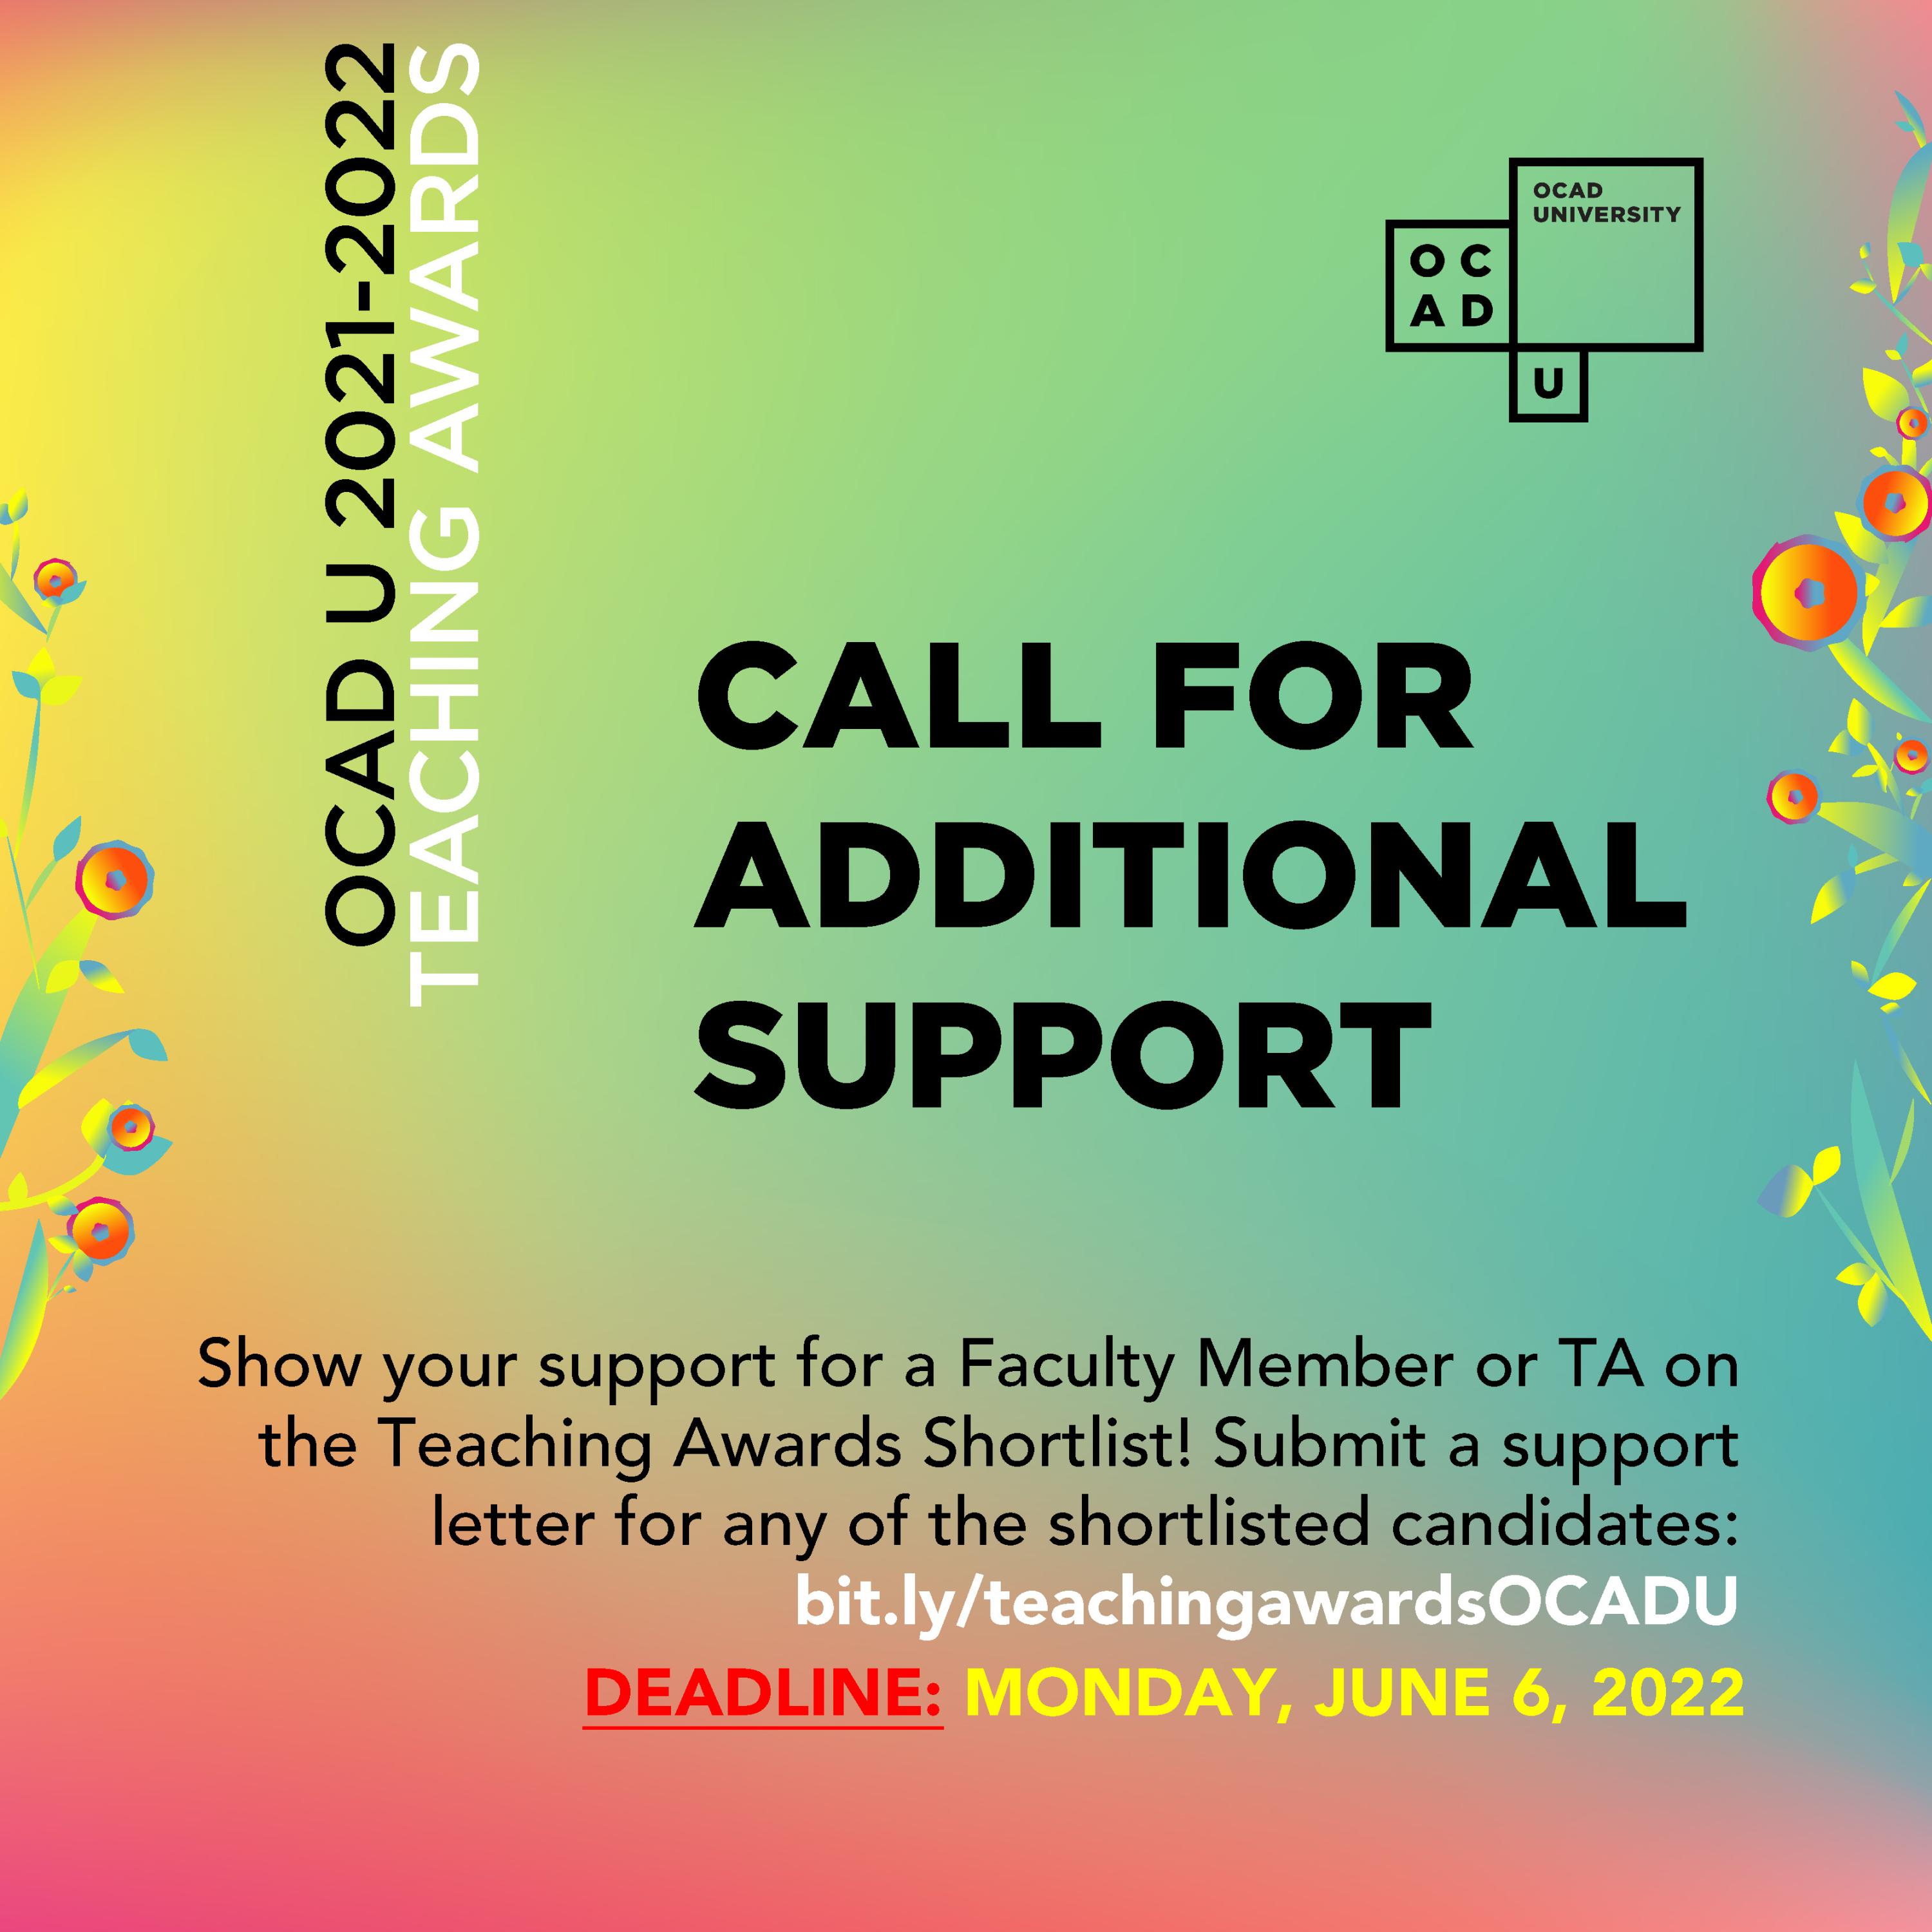 Promo for call for additional support for teaching awards 2021-2022 shortlisted candidates